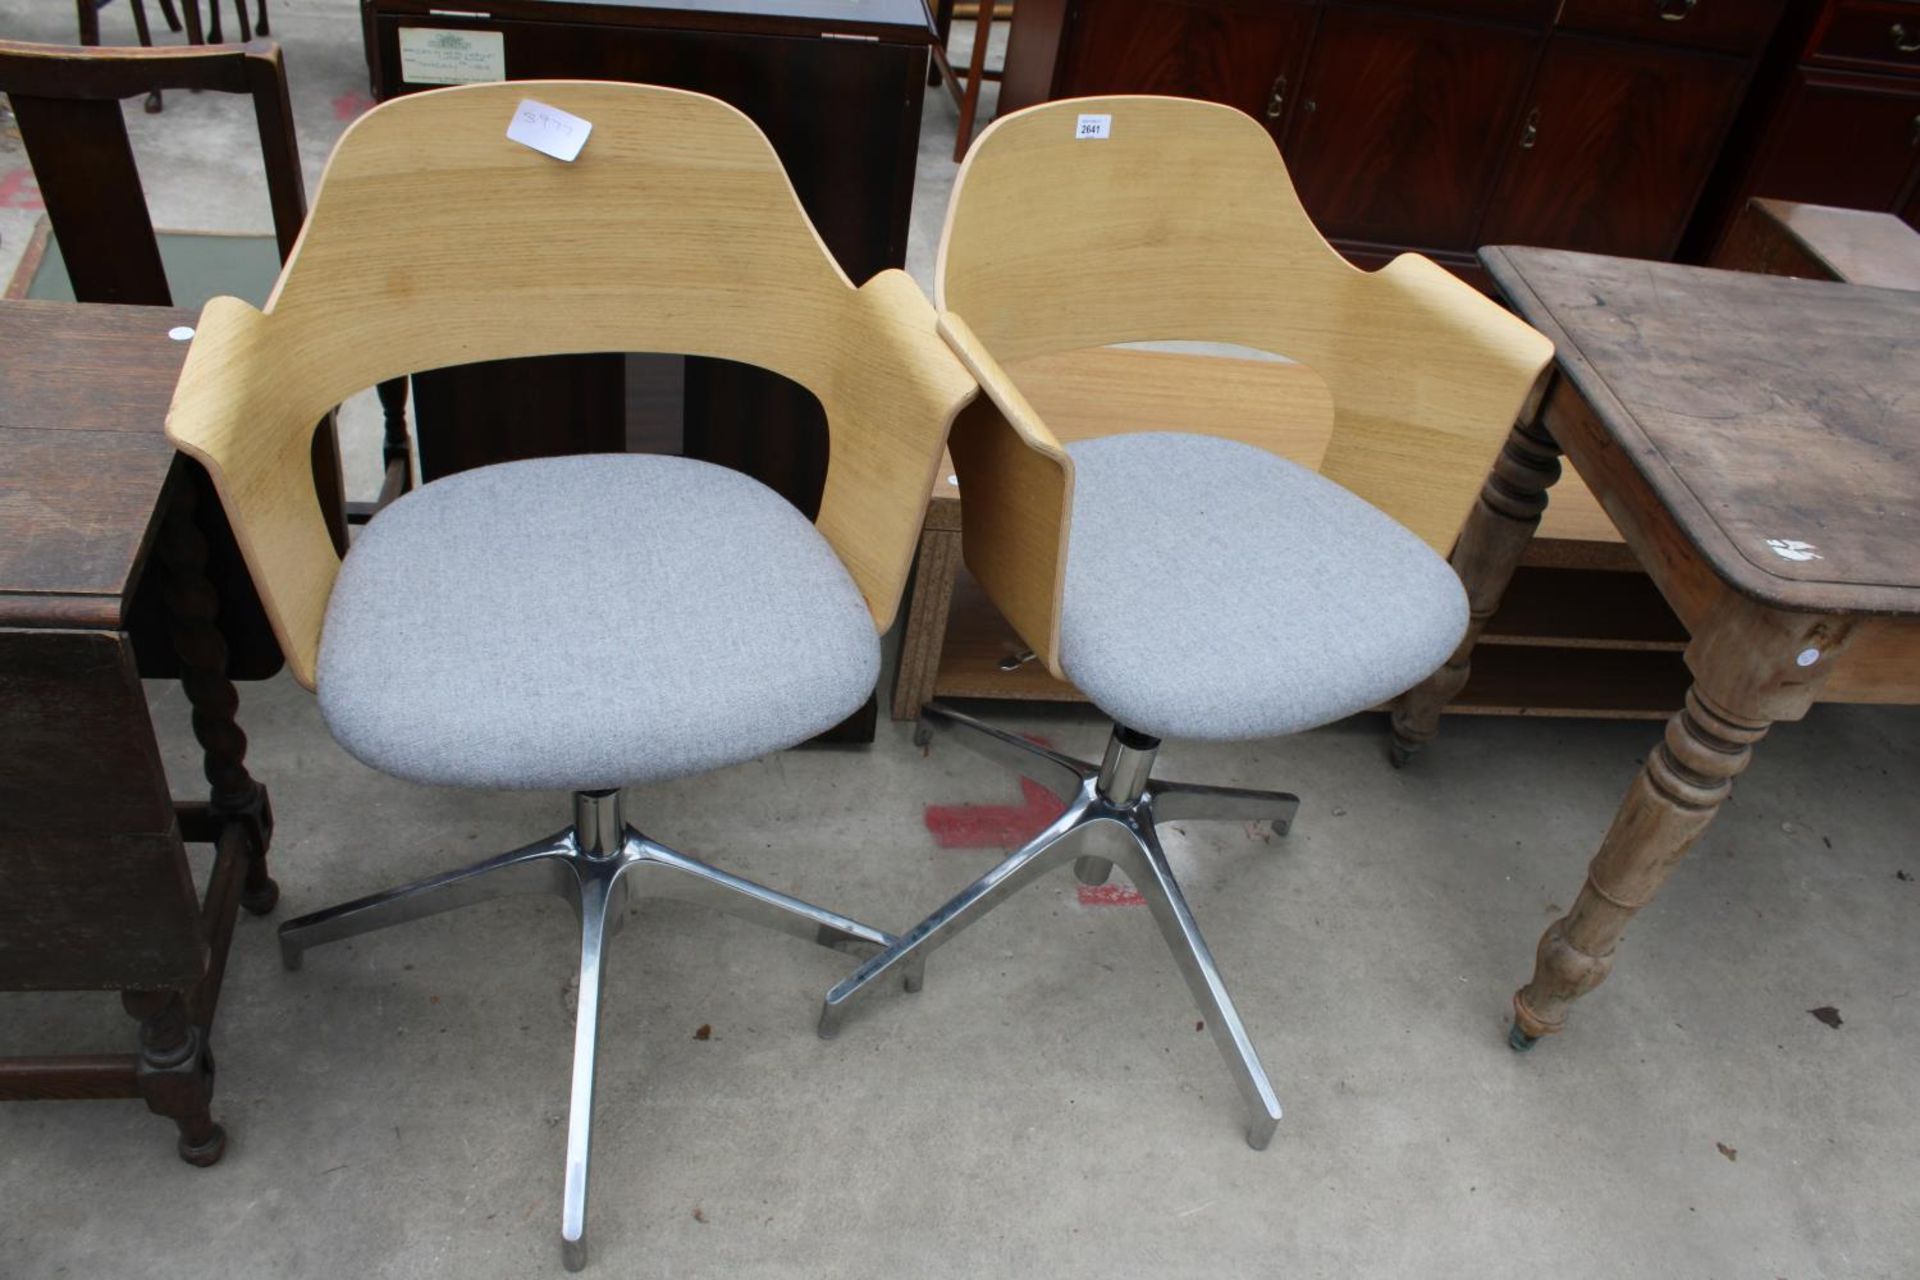 A PAIR OF BENTWOOD CONFERENCE CHAIRS ON SWIVEL BASES